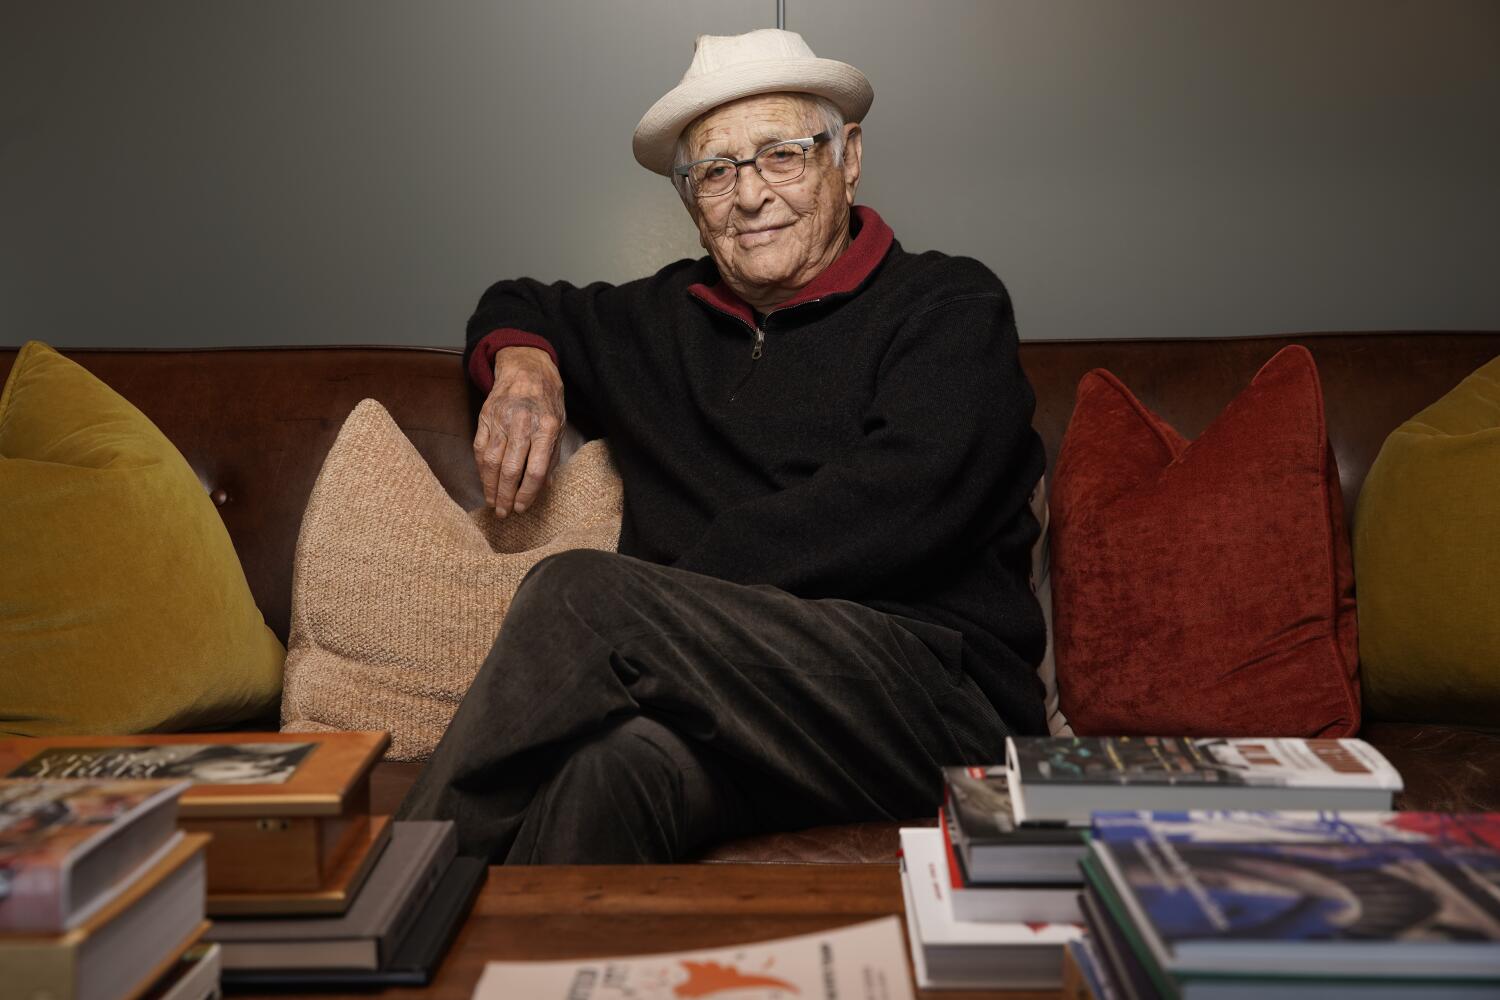 CBS News' Dr. Jon LaPook on Norman Lear, his father-in-law: 'I had a master class in life'